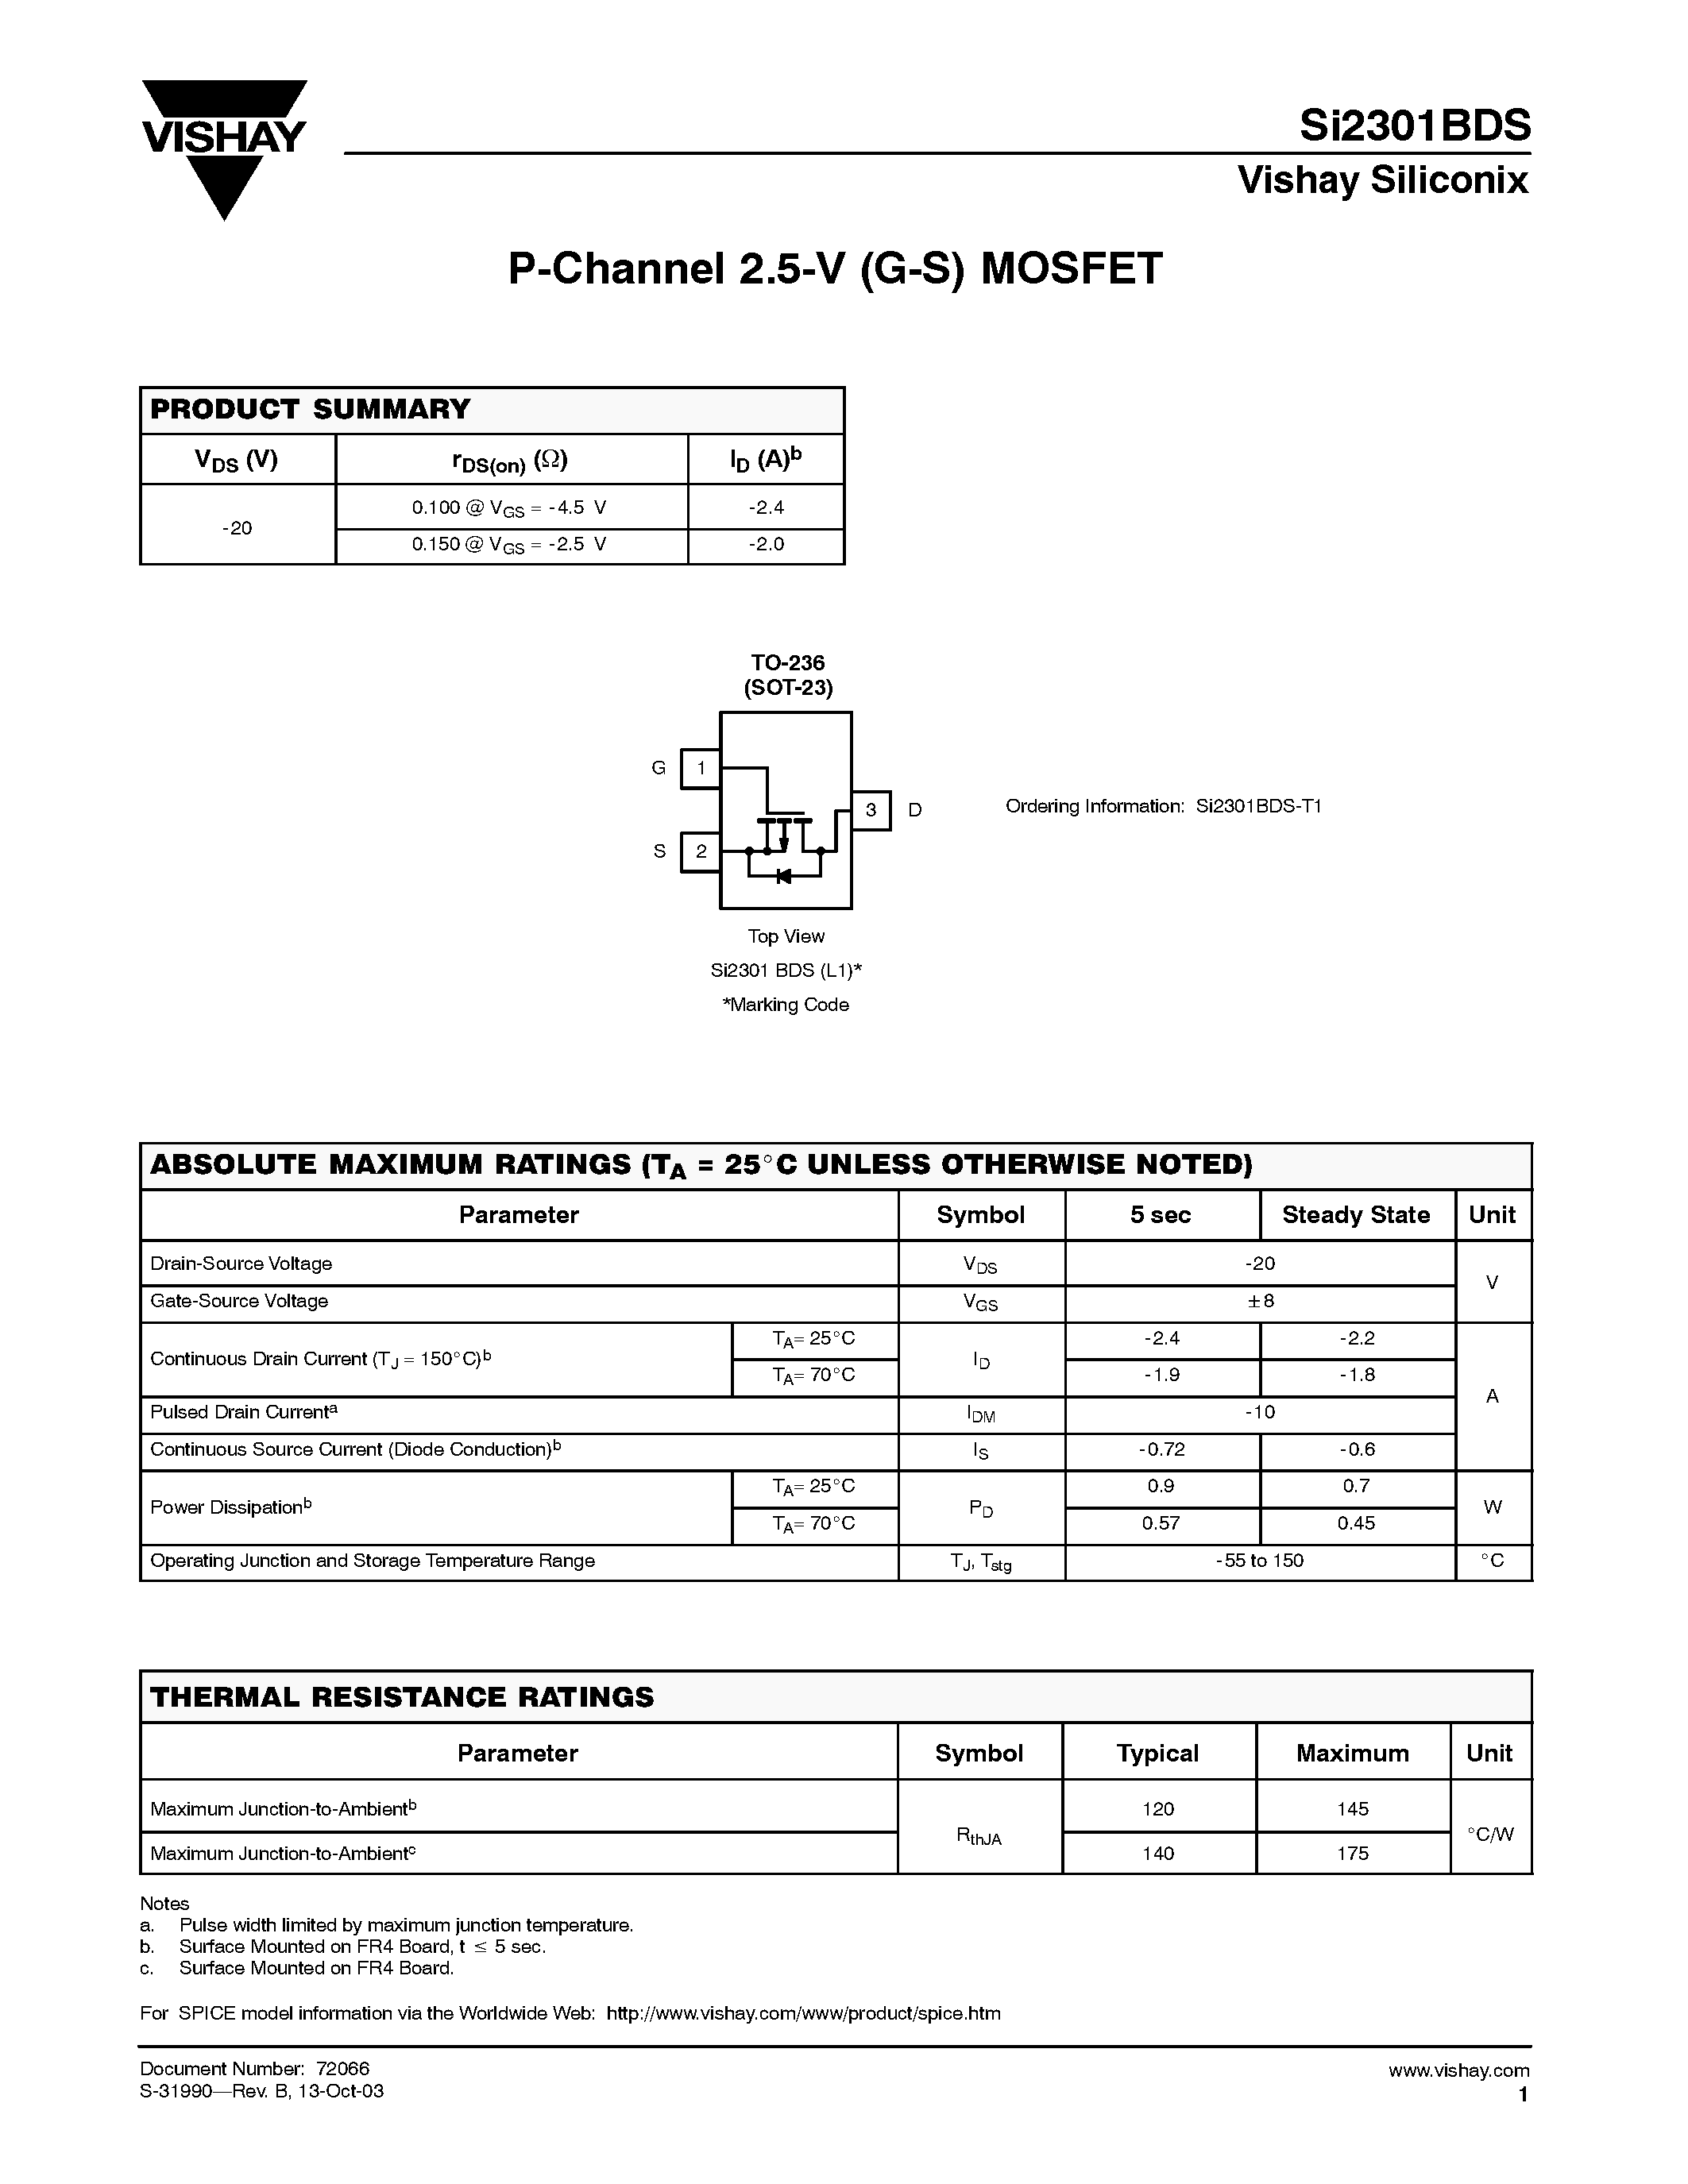 Даташит SI2301BDS - P-Channel 2.5-V (G-S) MOSFET страница 1